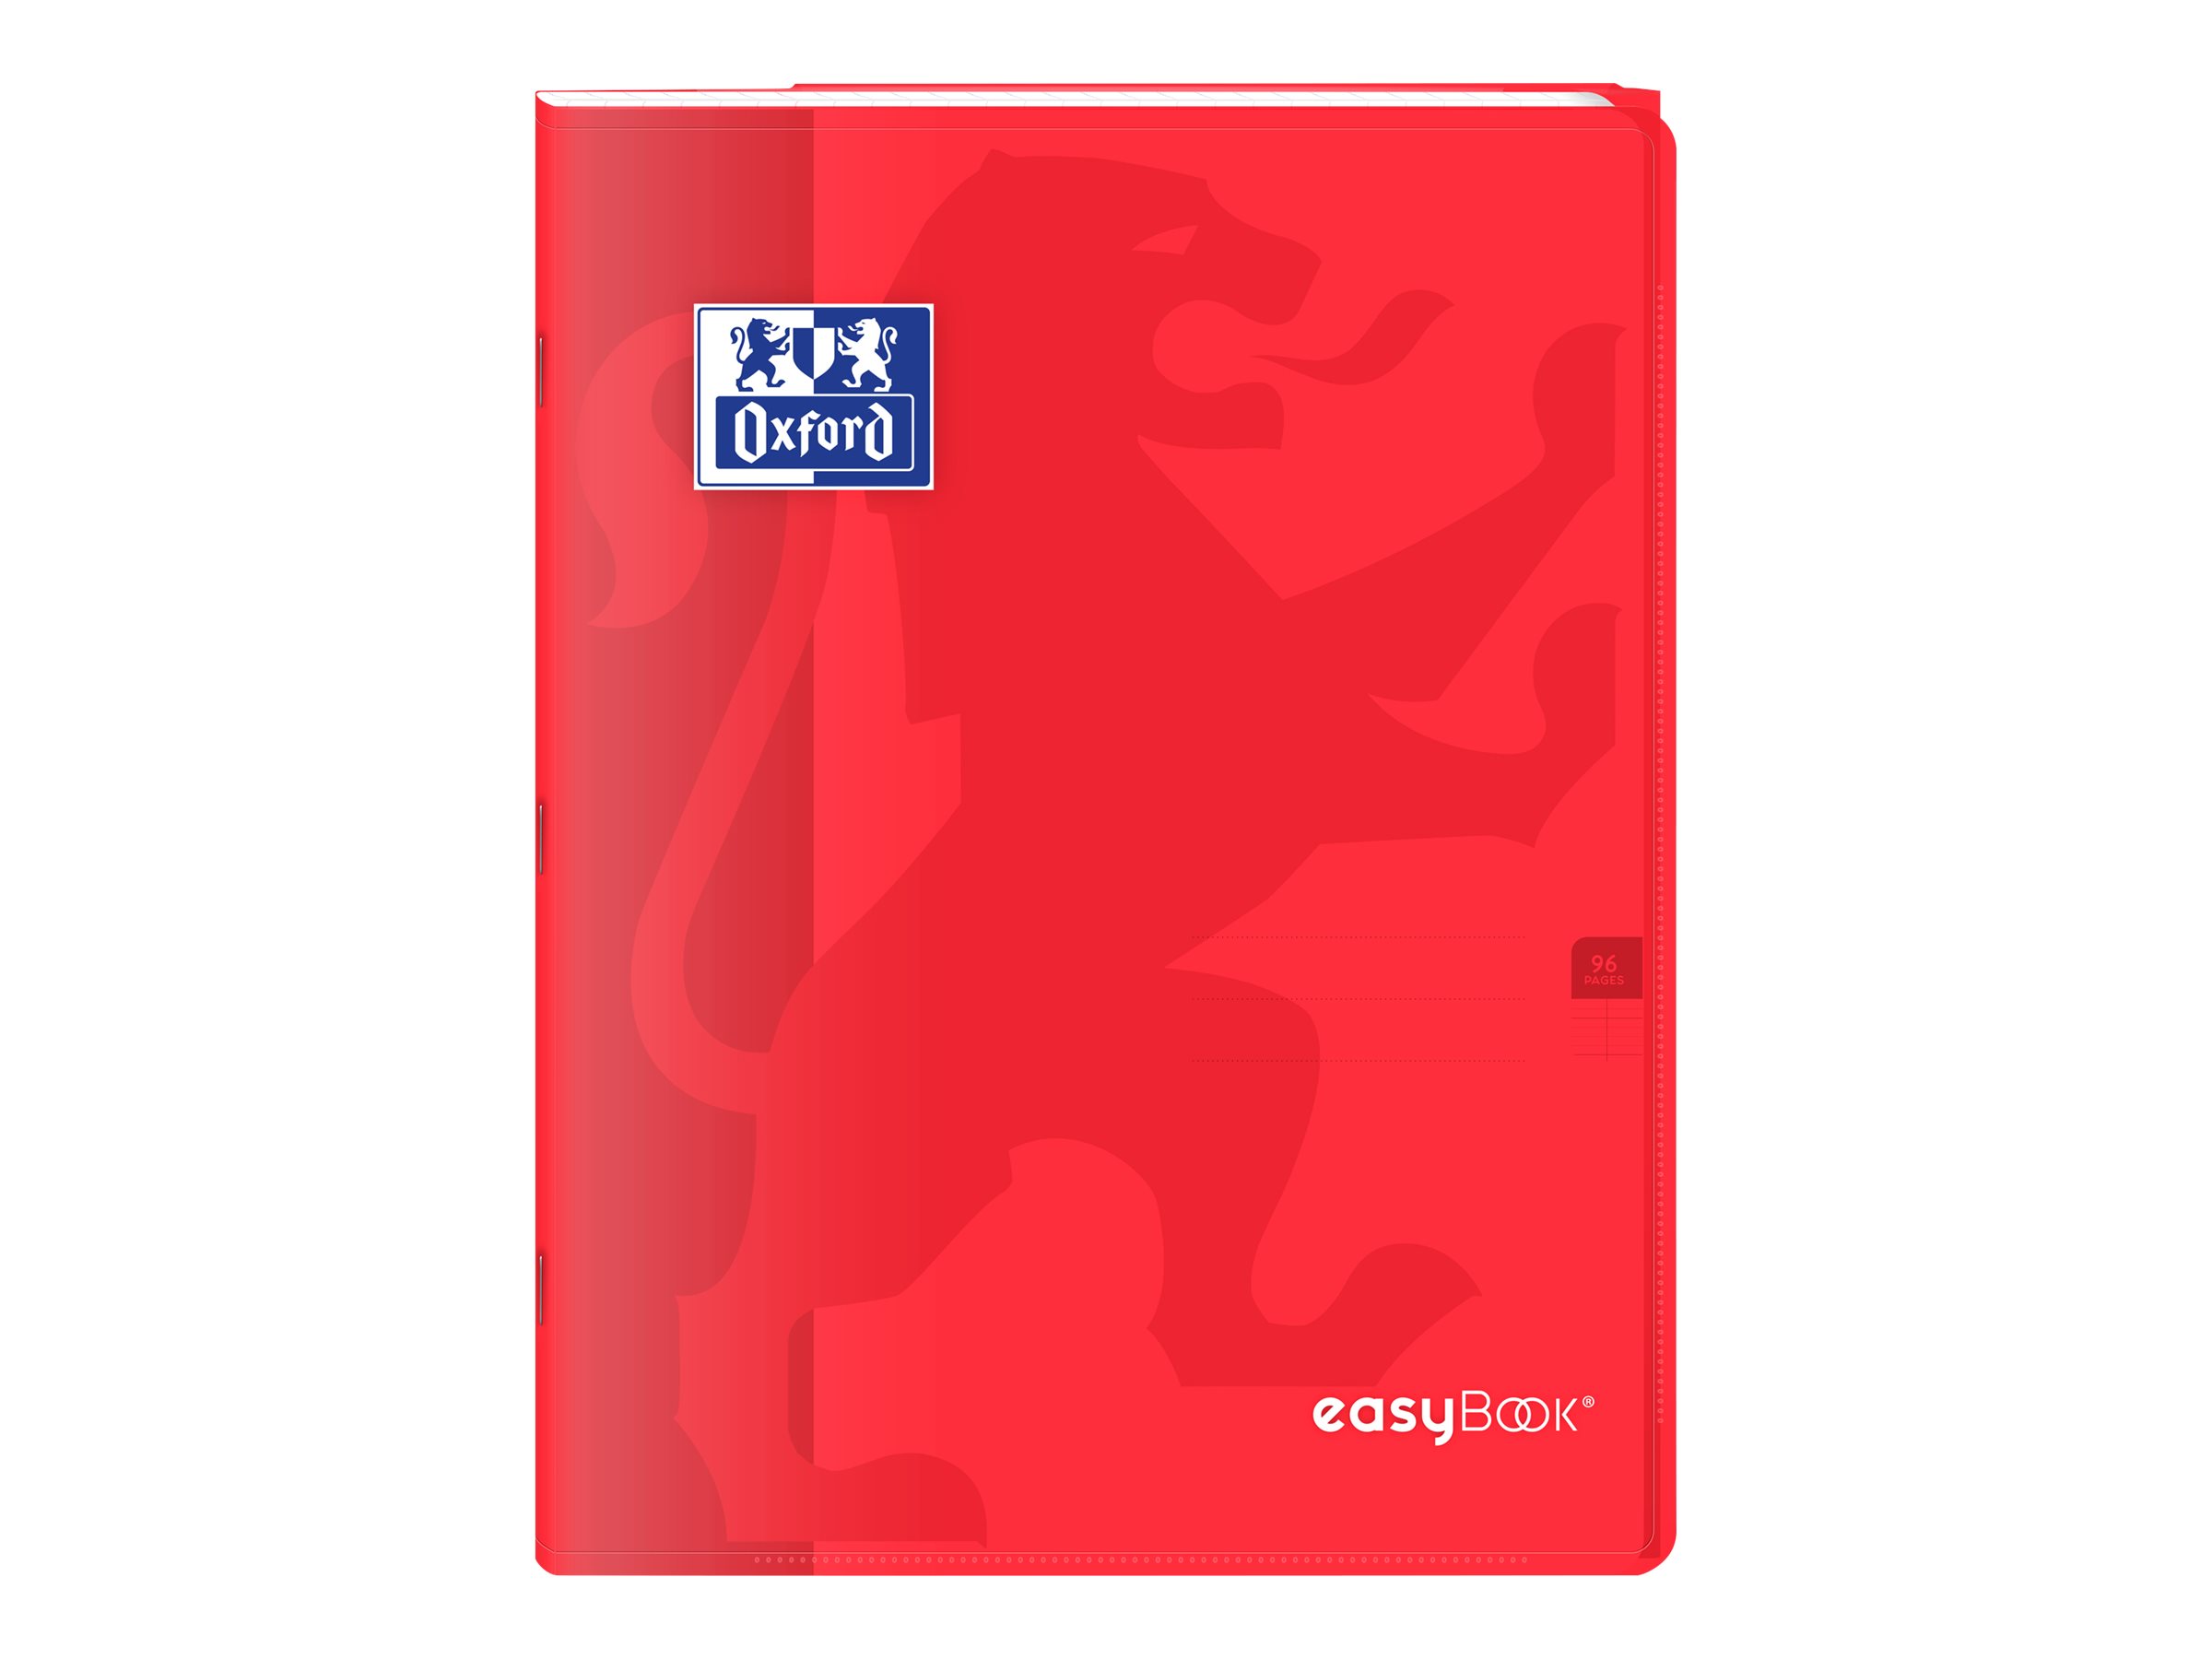 Oxford EasyBook - Cahier polypro 24 x 32 cm - 96 pages - grands carreaux (Seyes) - rouge